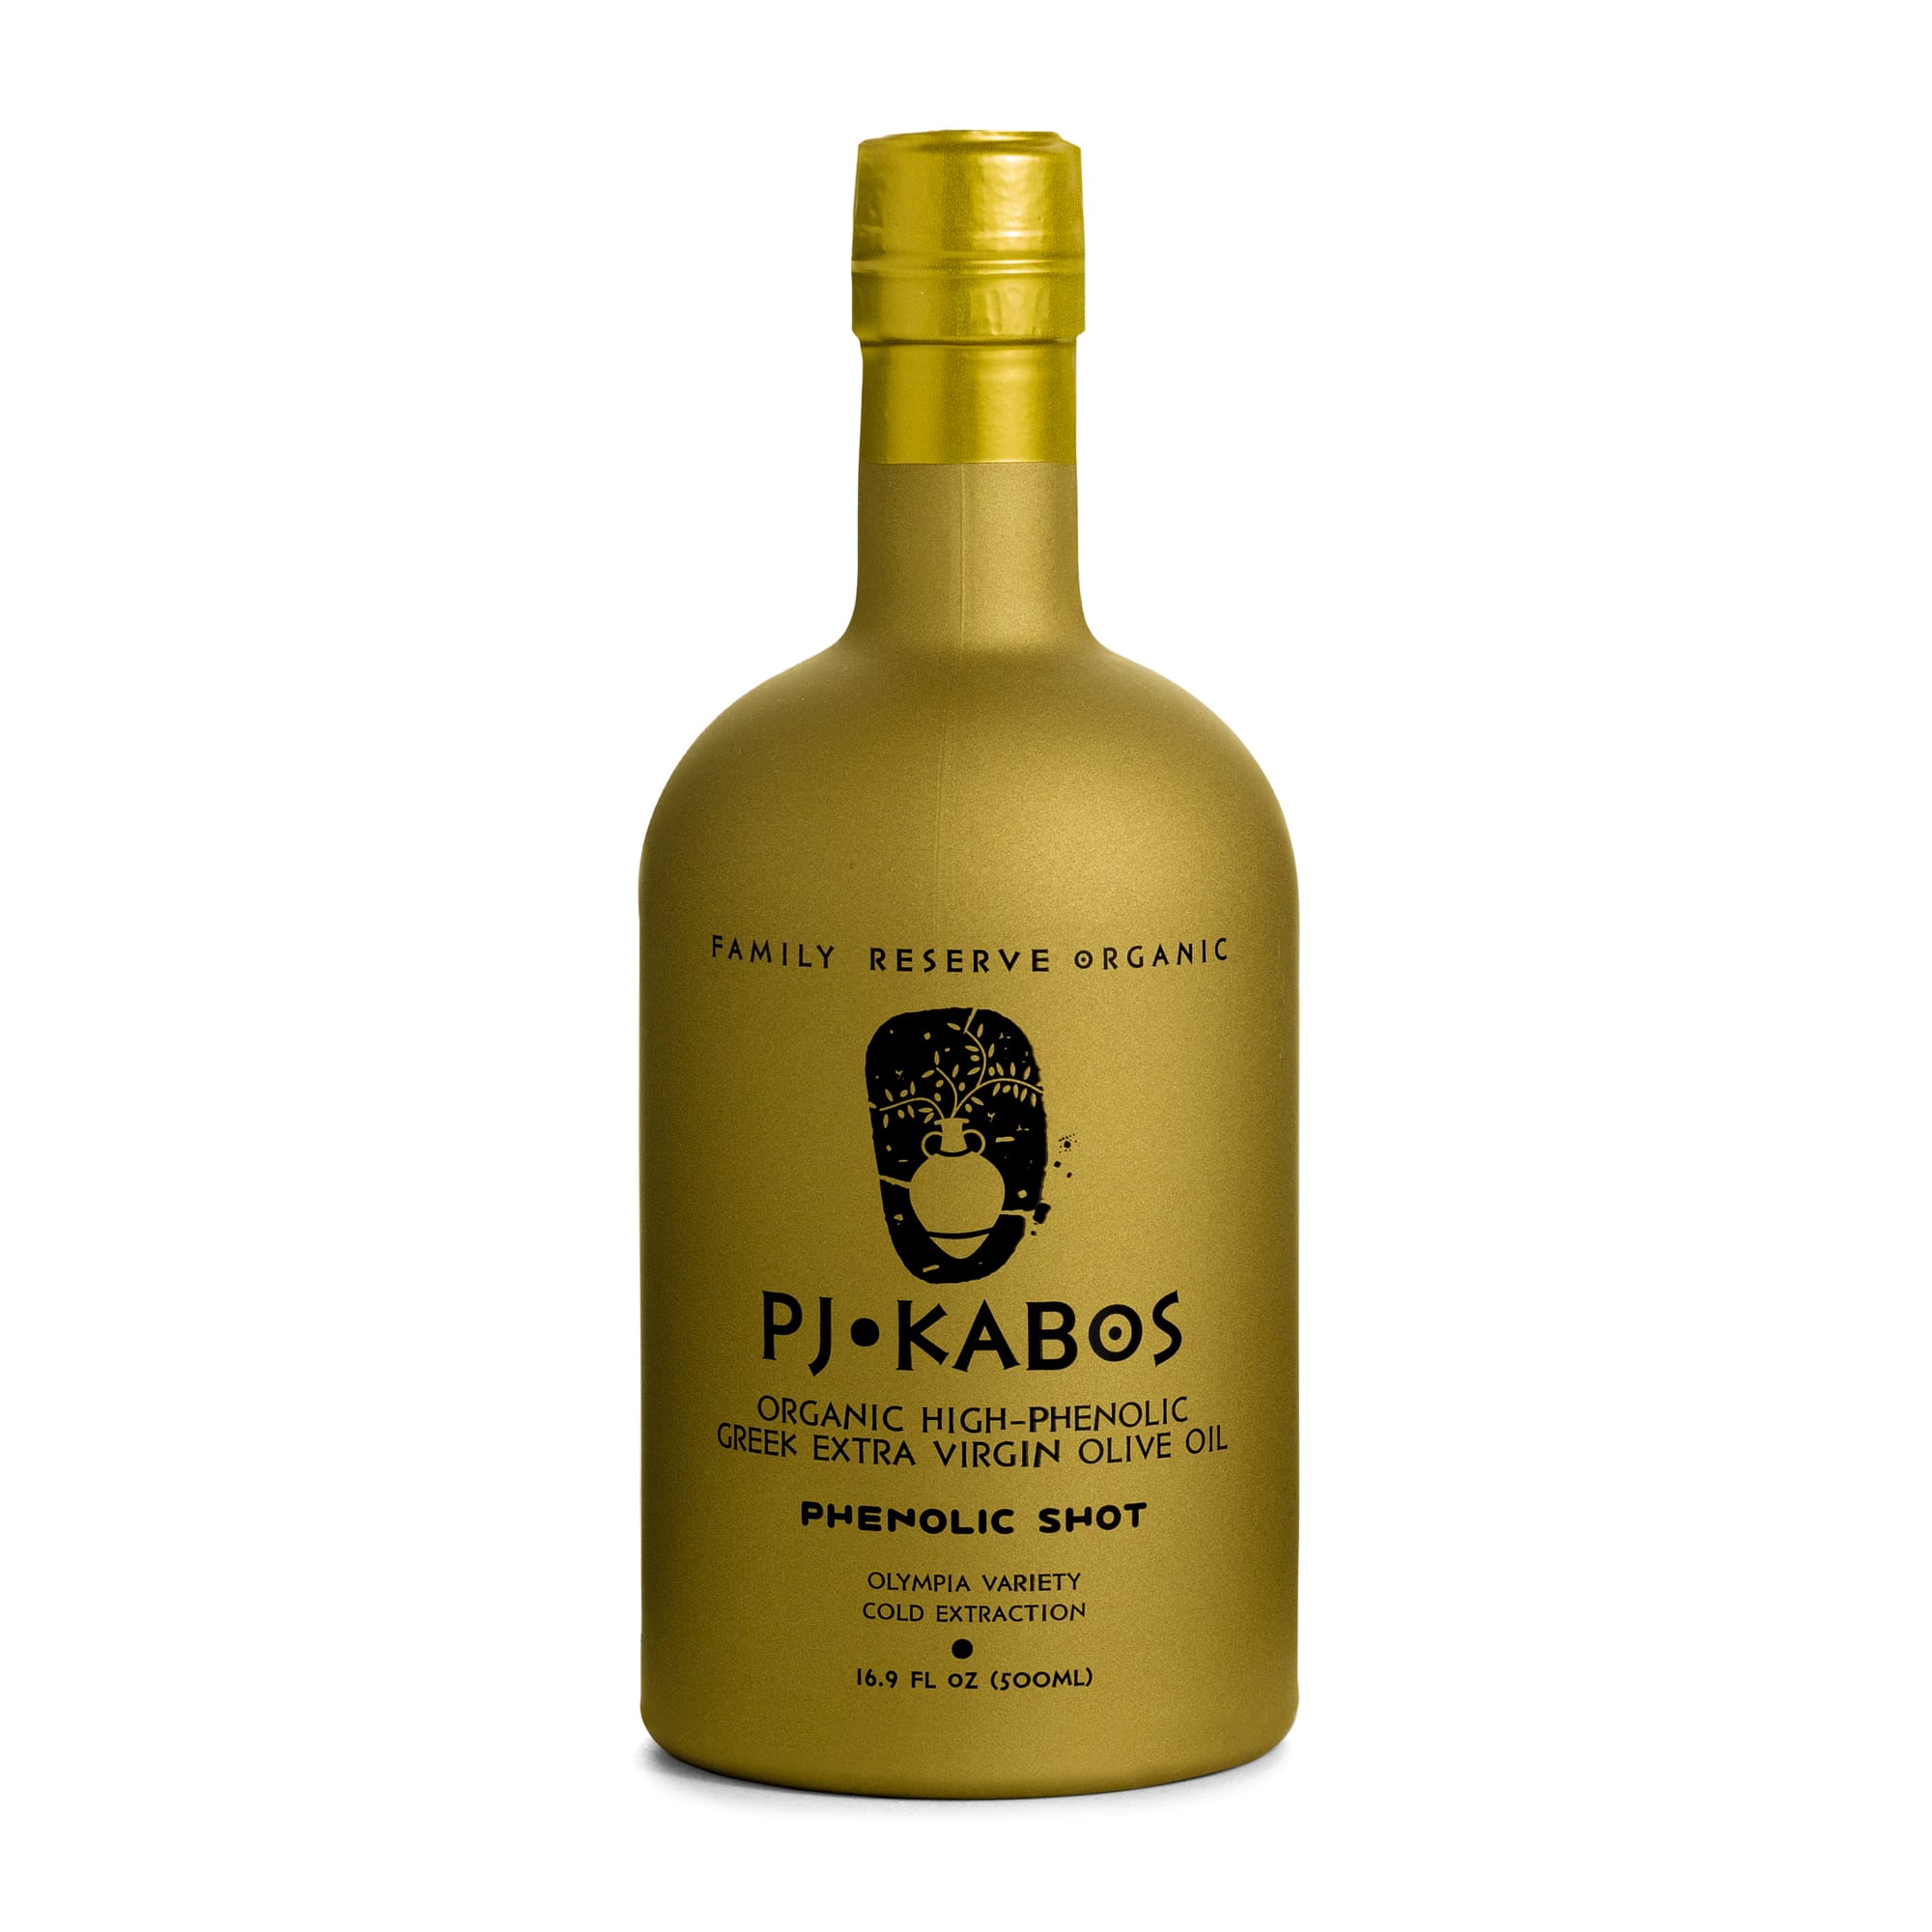 A bottle of PJ KABOS high phenolic extra virgin olive oil.